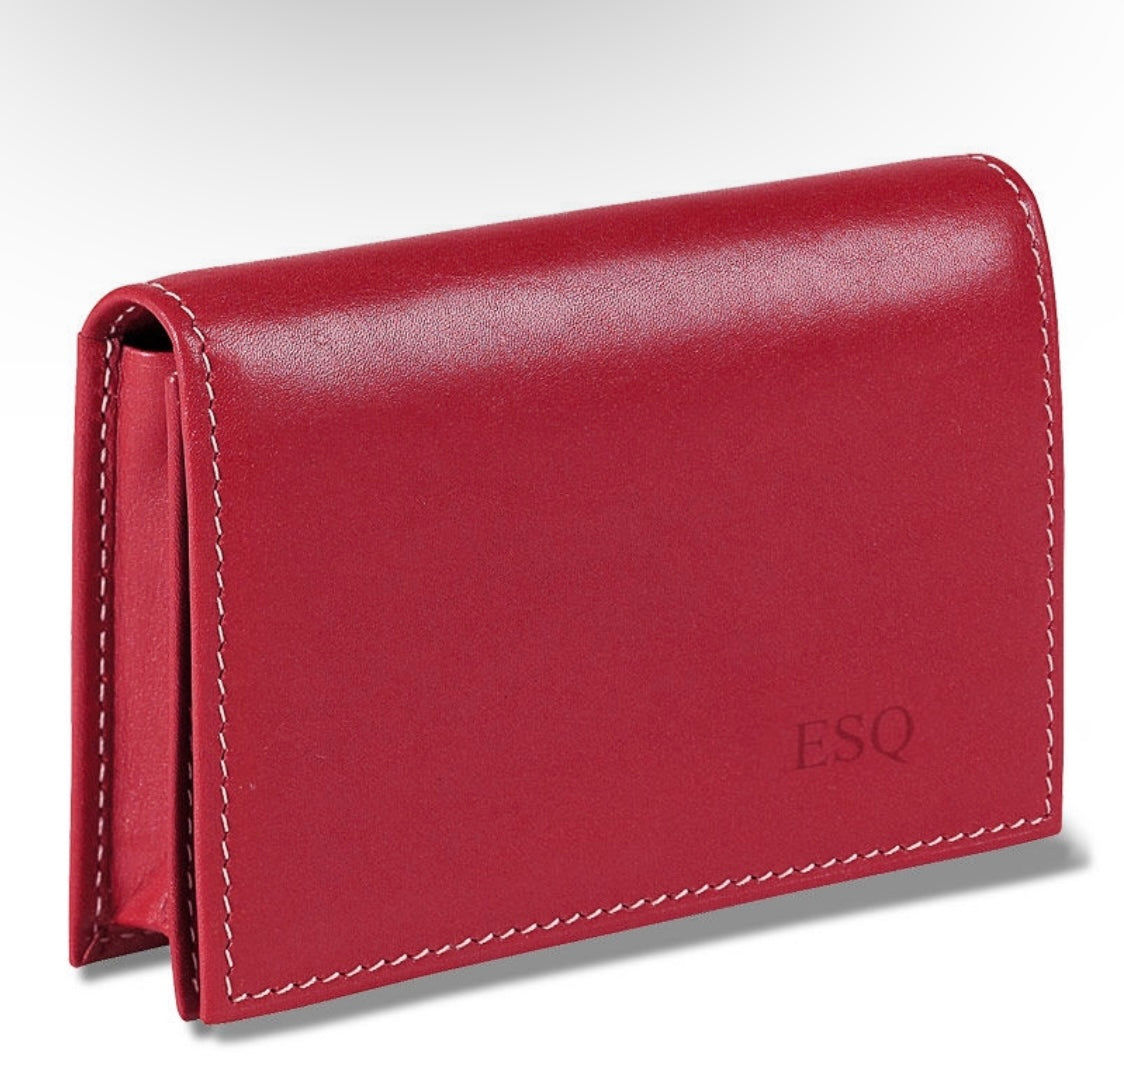 Esquire Leather Business Cardholder